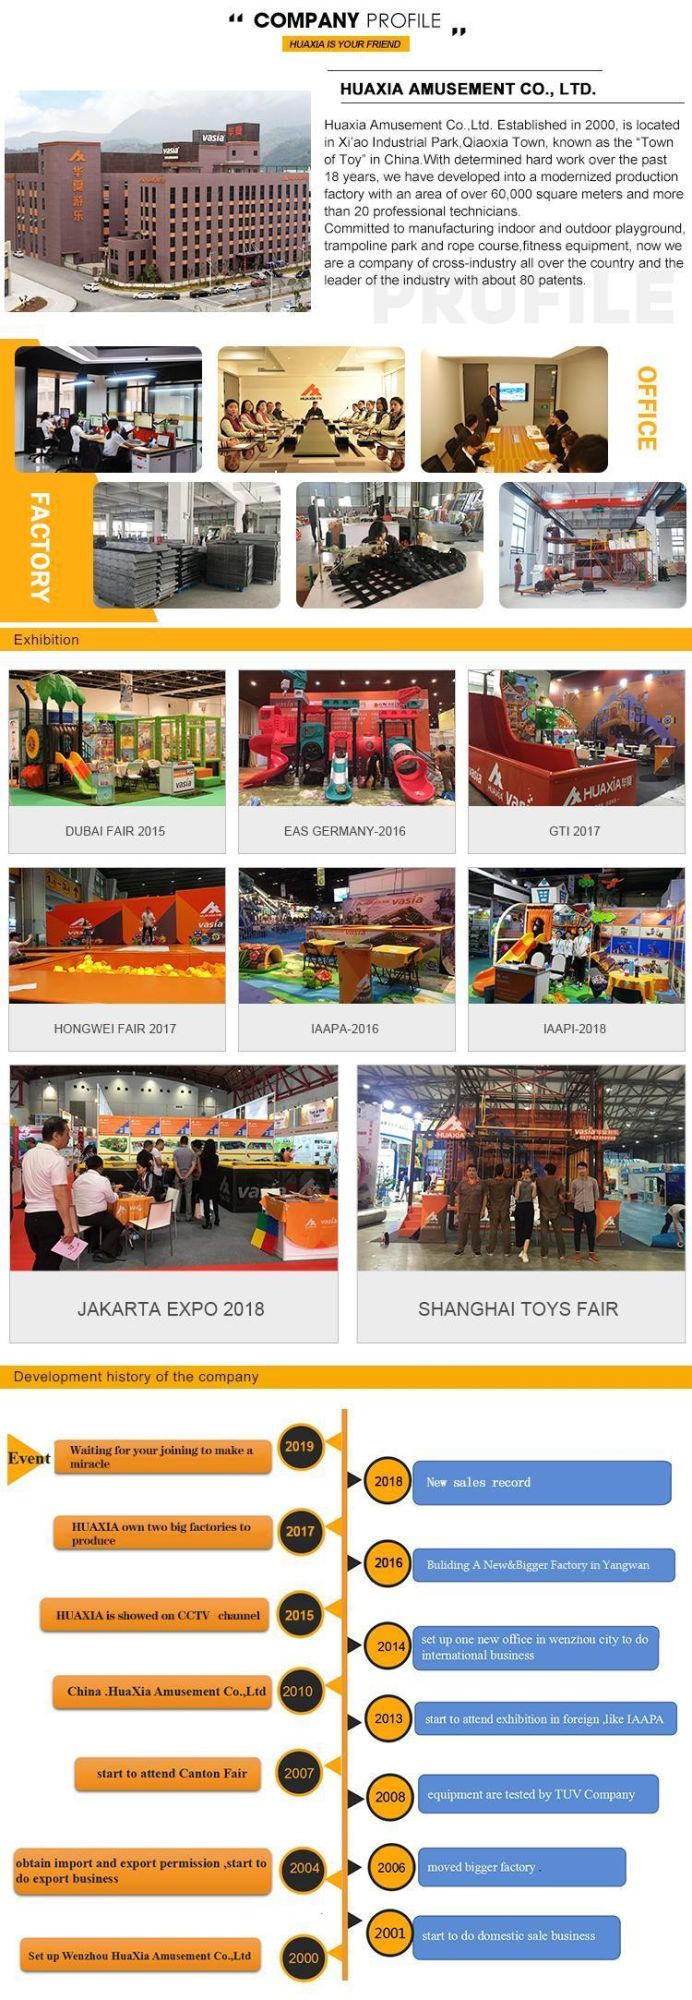 Indoor Play Equipment for Kids Indoor Playground Fun Soft Play Equipment for Home